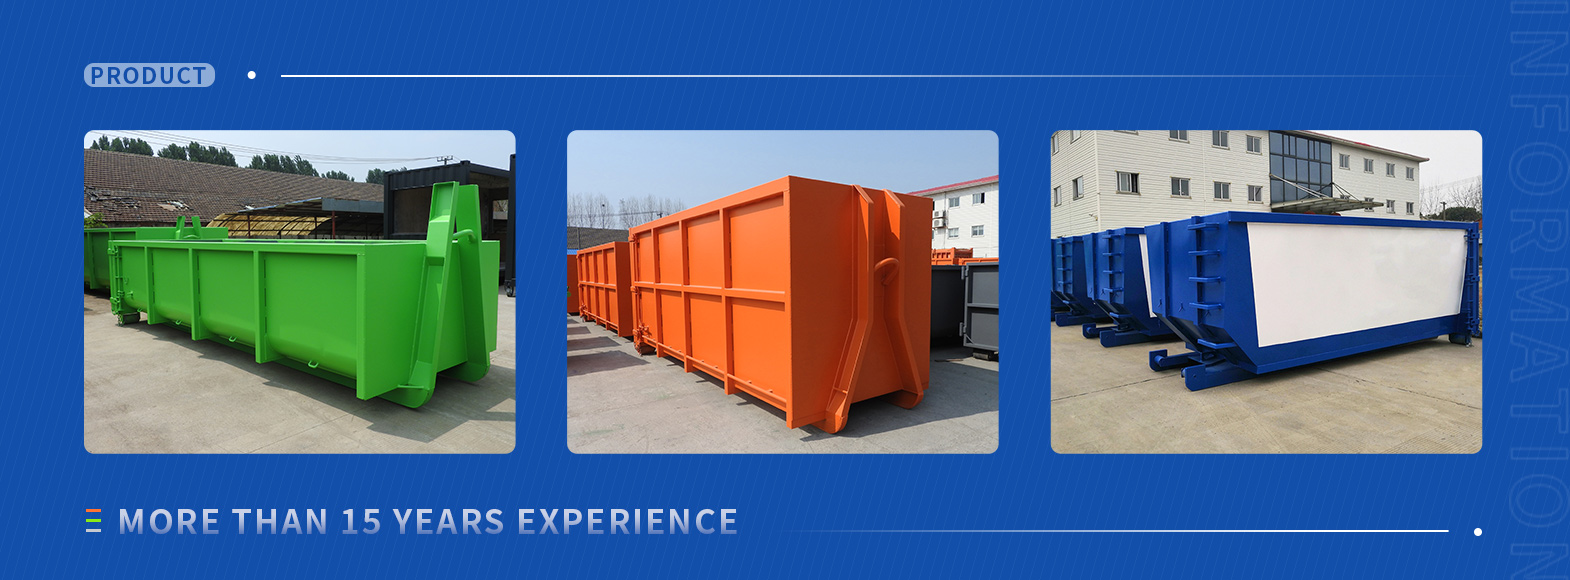 Koukku Lift Containers For Sale